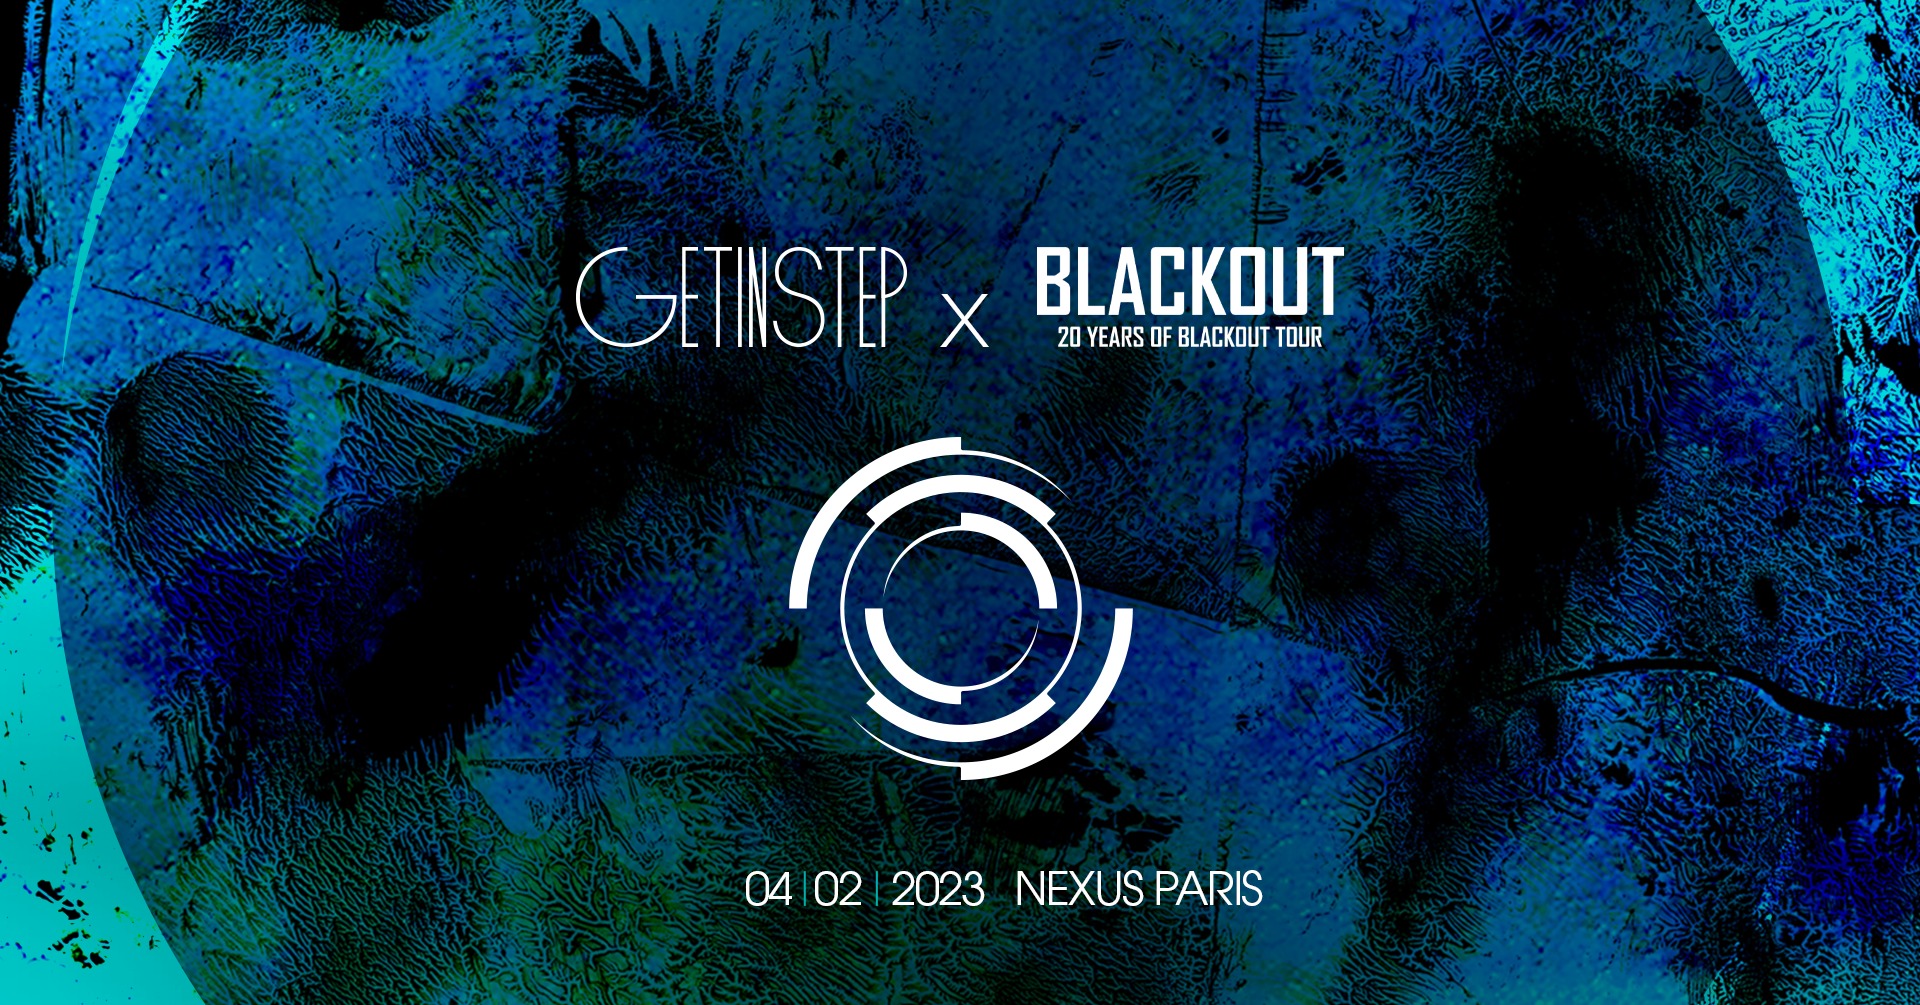 GET IN STEP x BLACKOUT